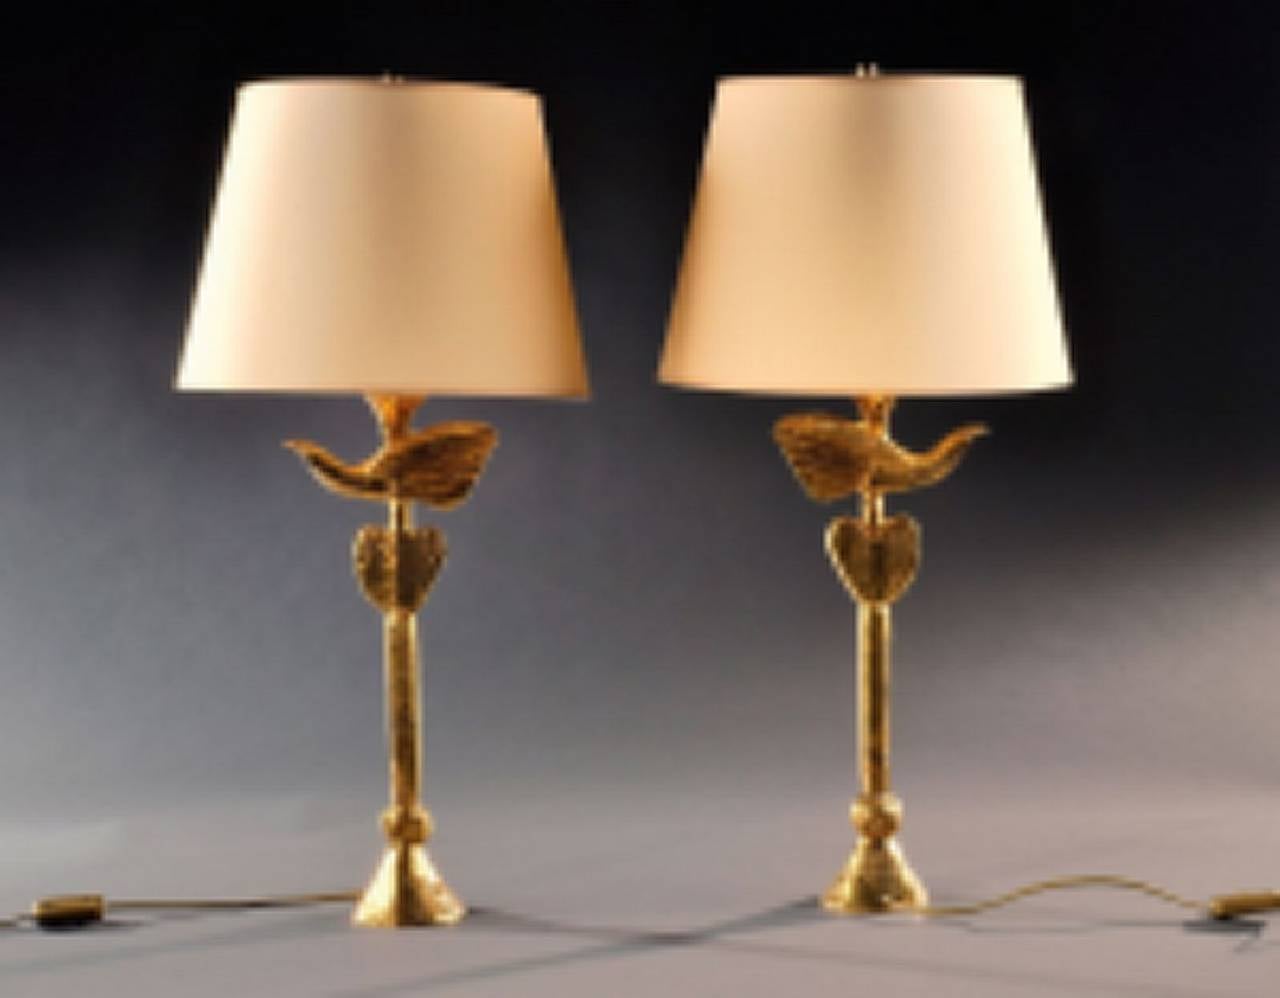 Pair of figurative bronze table lamps by Pierre Casenove for Fondica, France circa 1990s. Height 73cm.